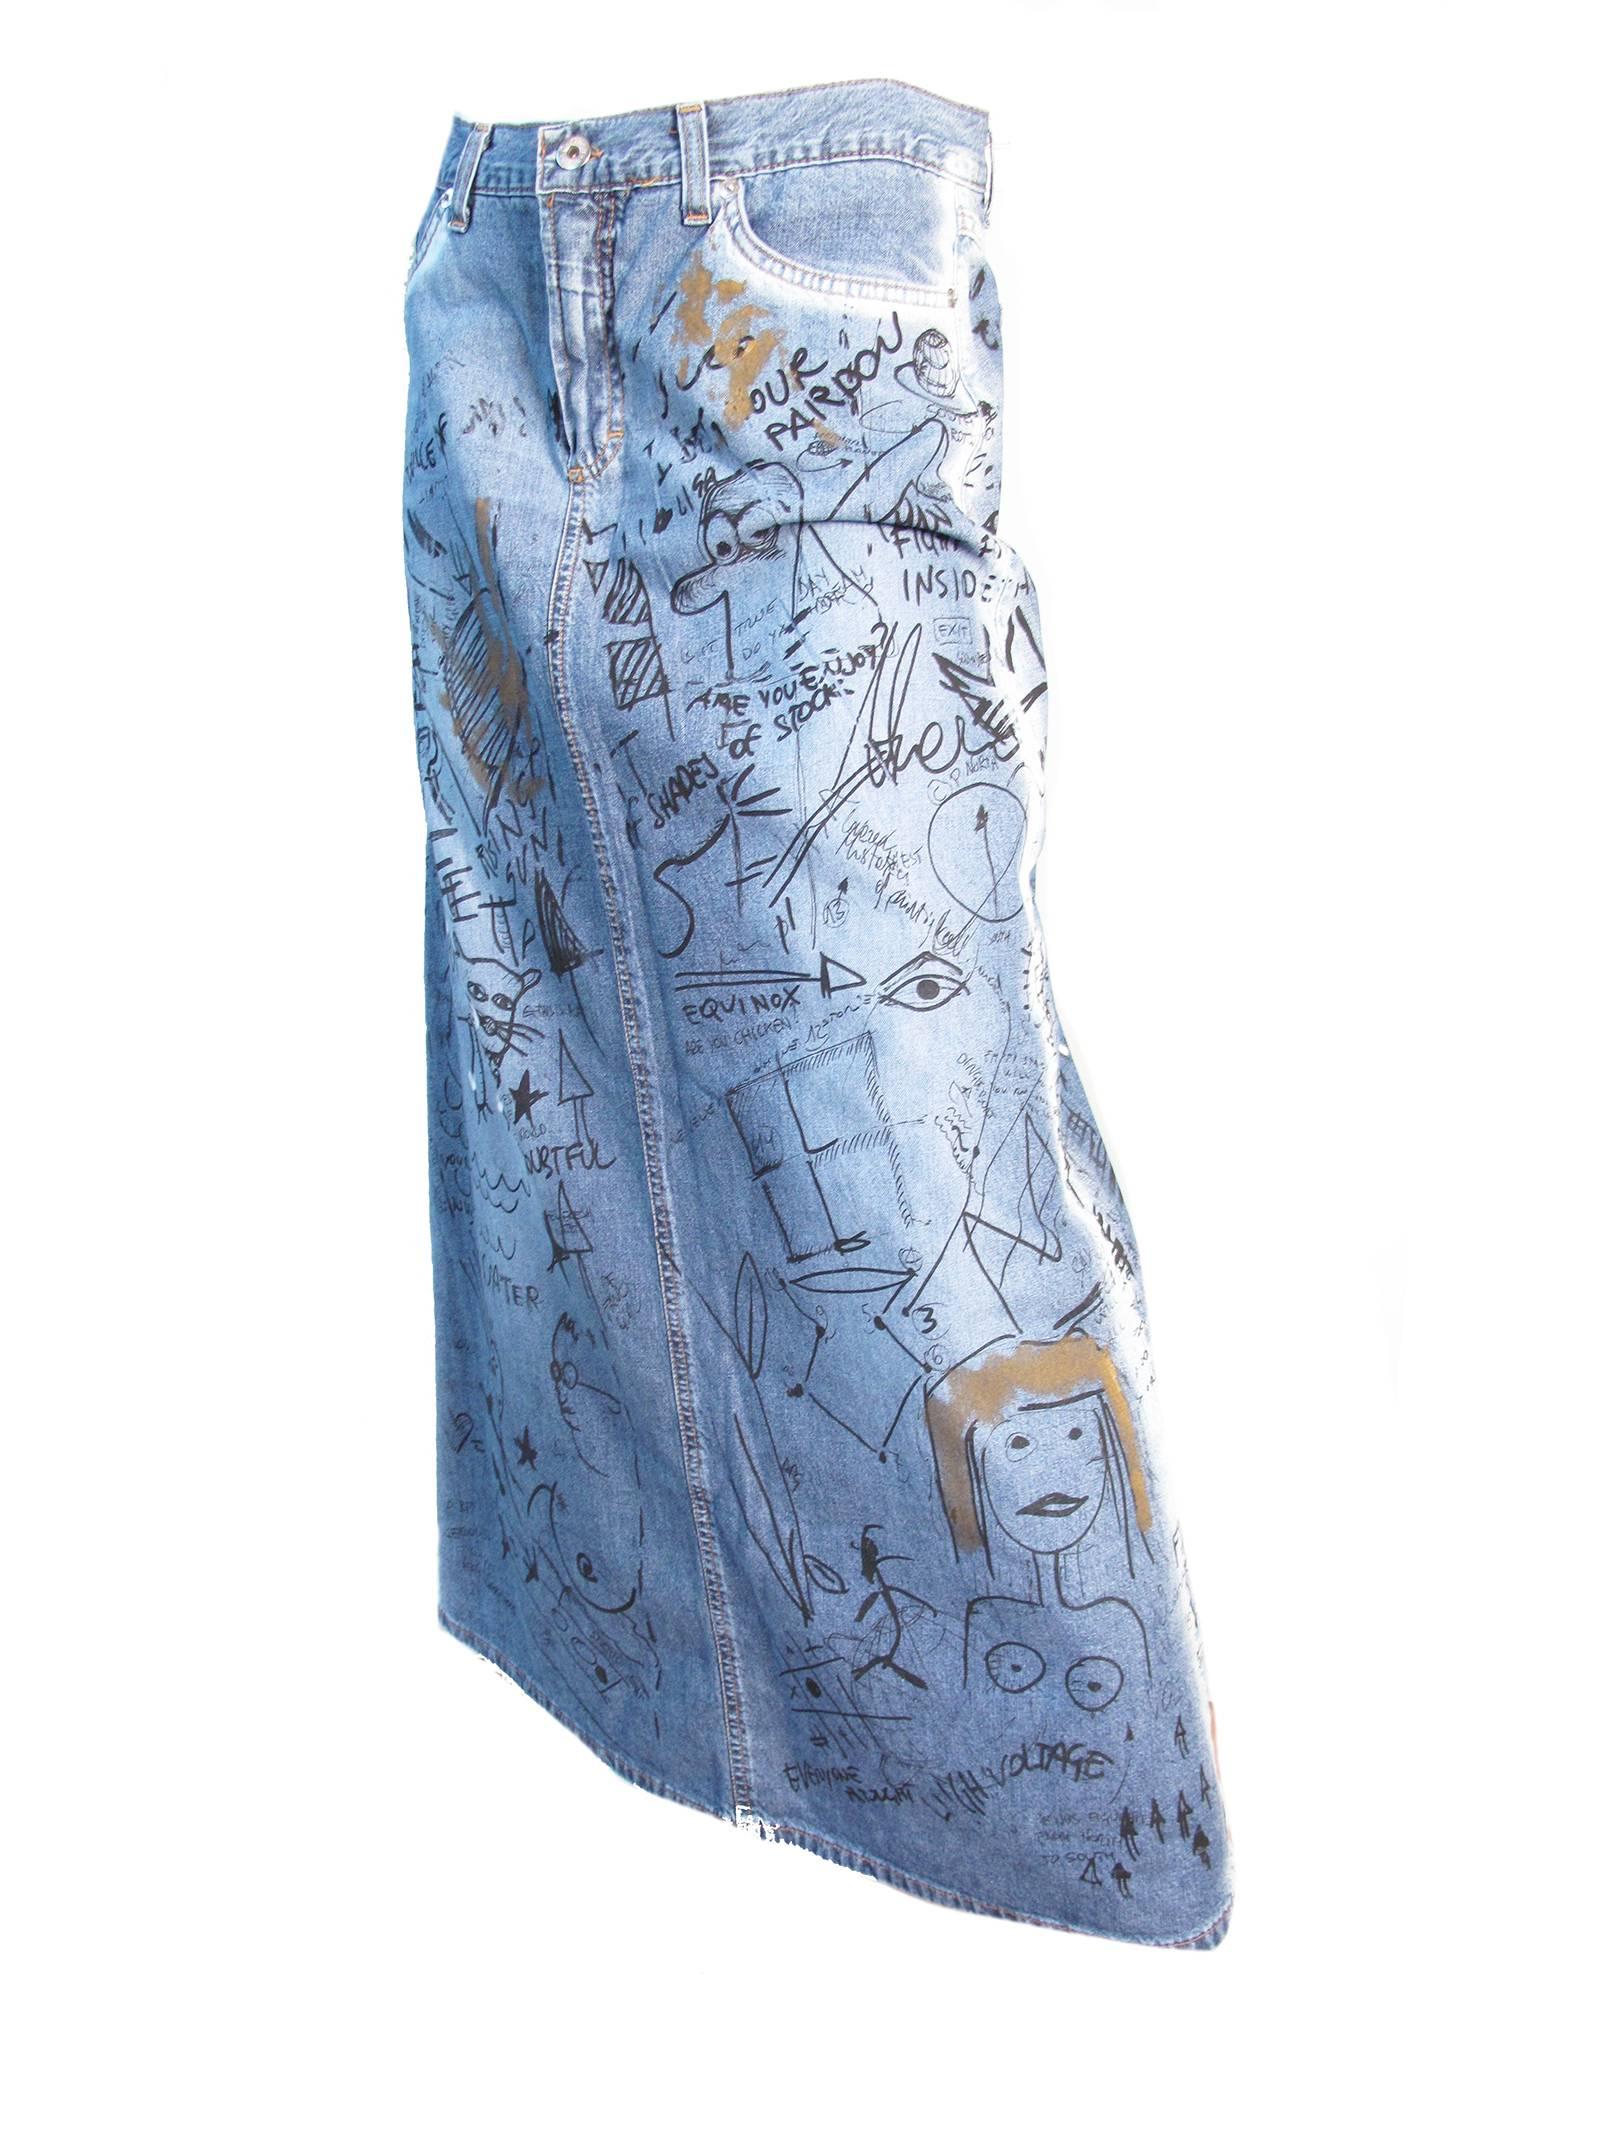 D & G long denim skirt with graffiti.  Condition: Excellent, original tags still attached.  Never worn. Size 42
31